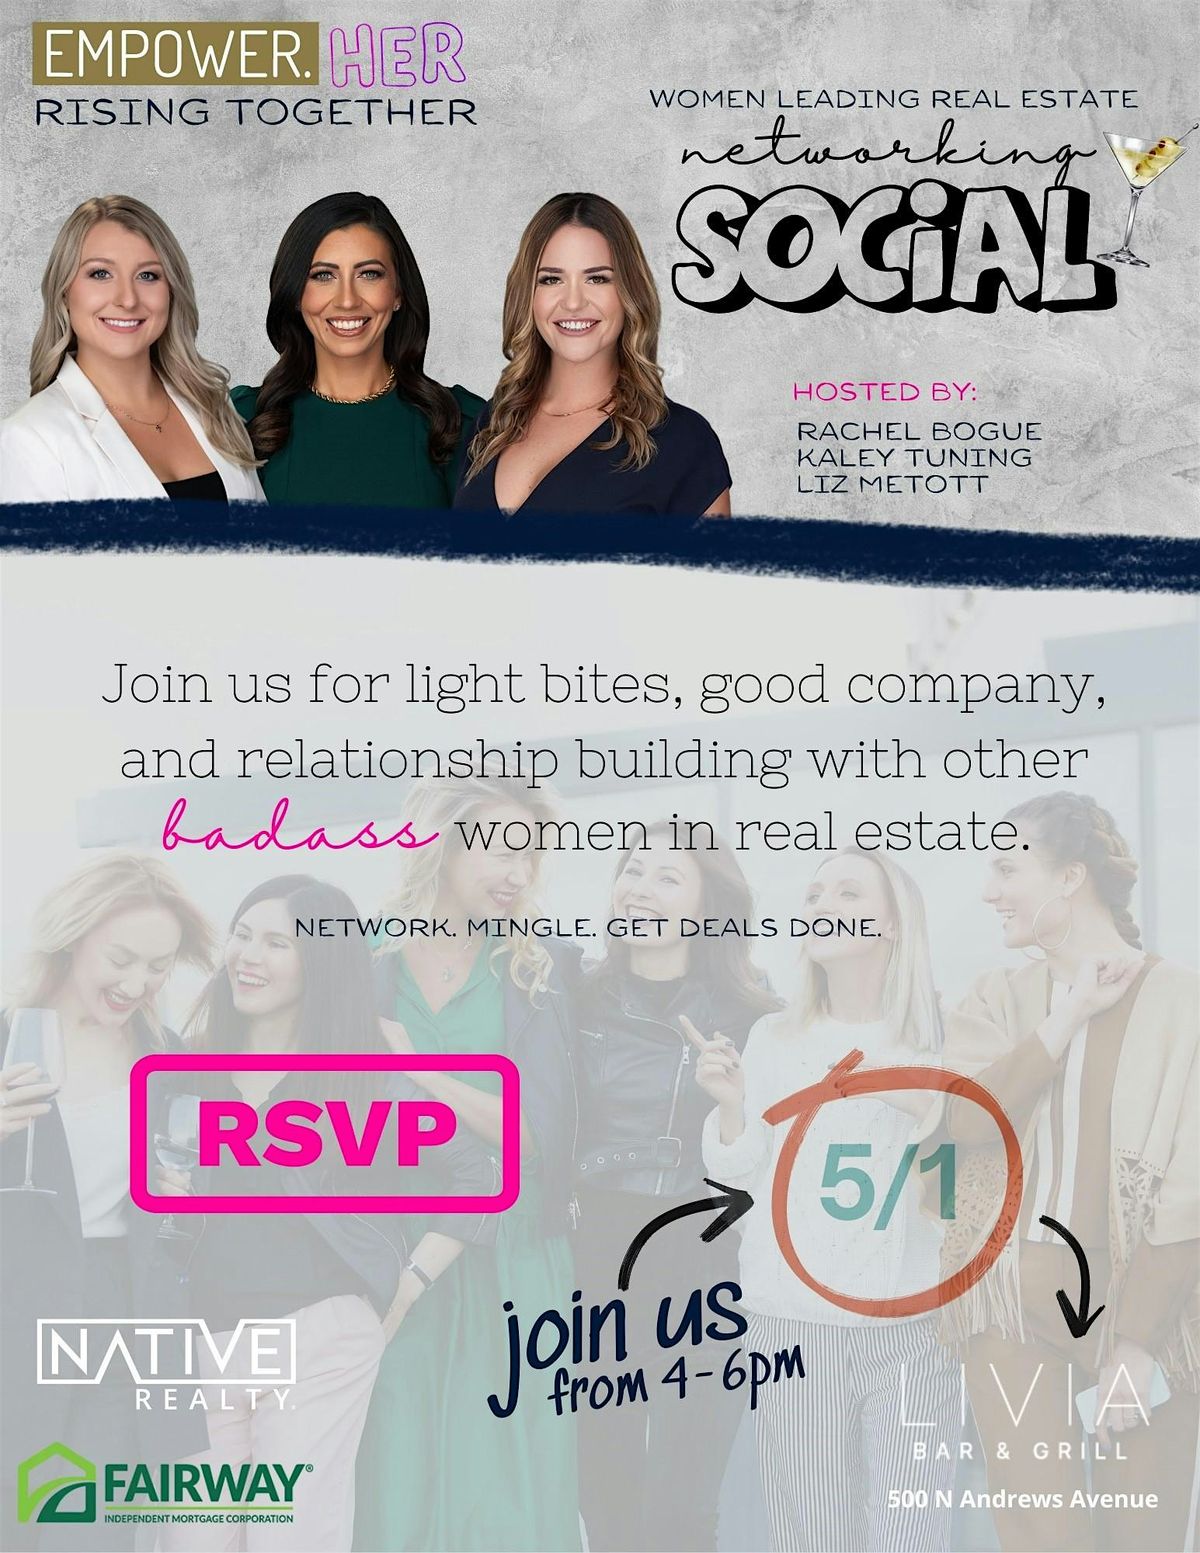 Empower HER Rising Together Networking Social